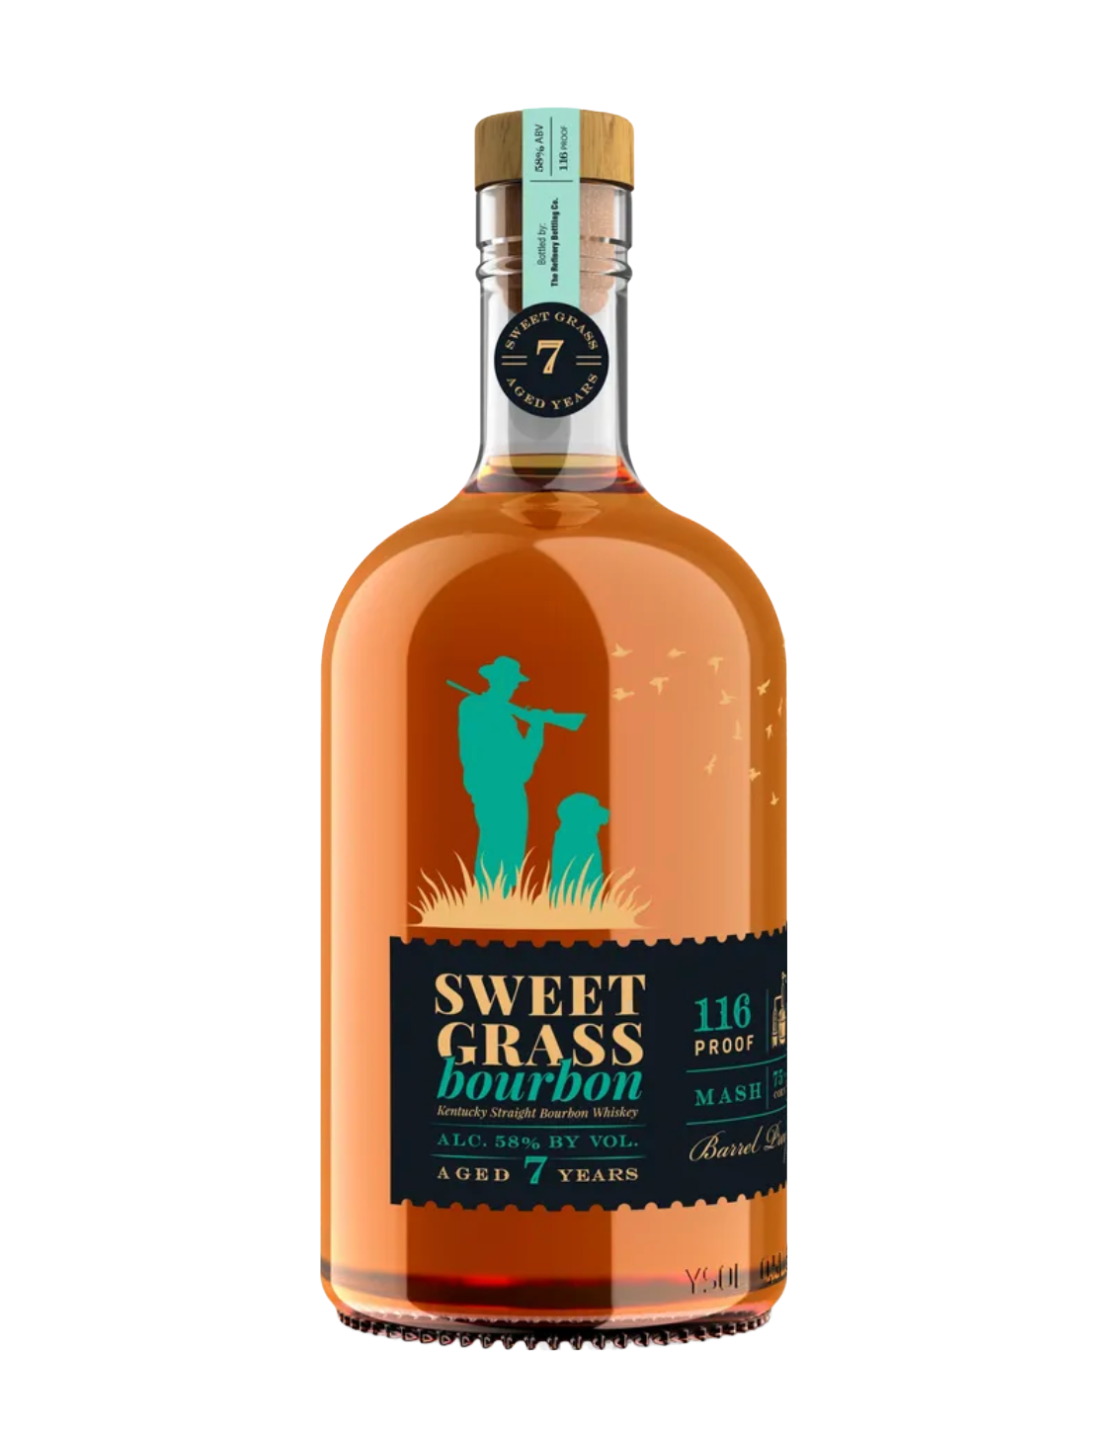 An elegant bottle of Sweet Grass Straight Bourbon in front of a plain white background